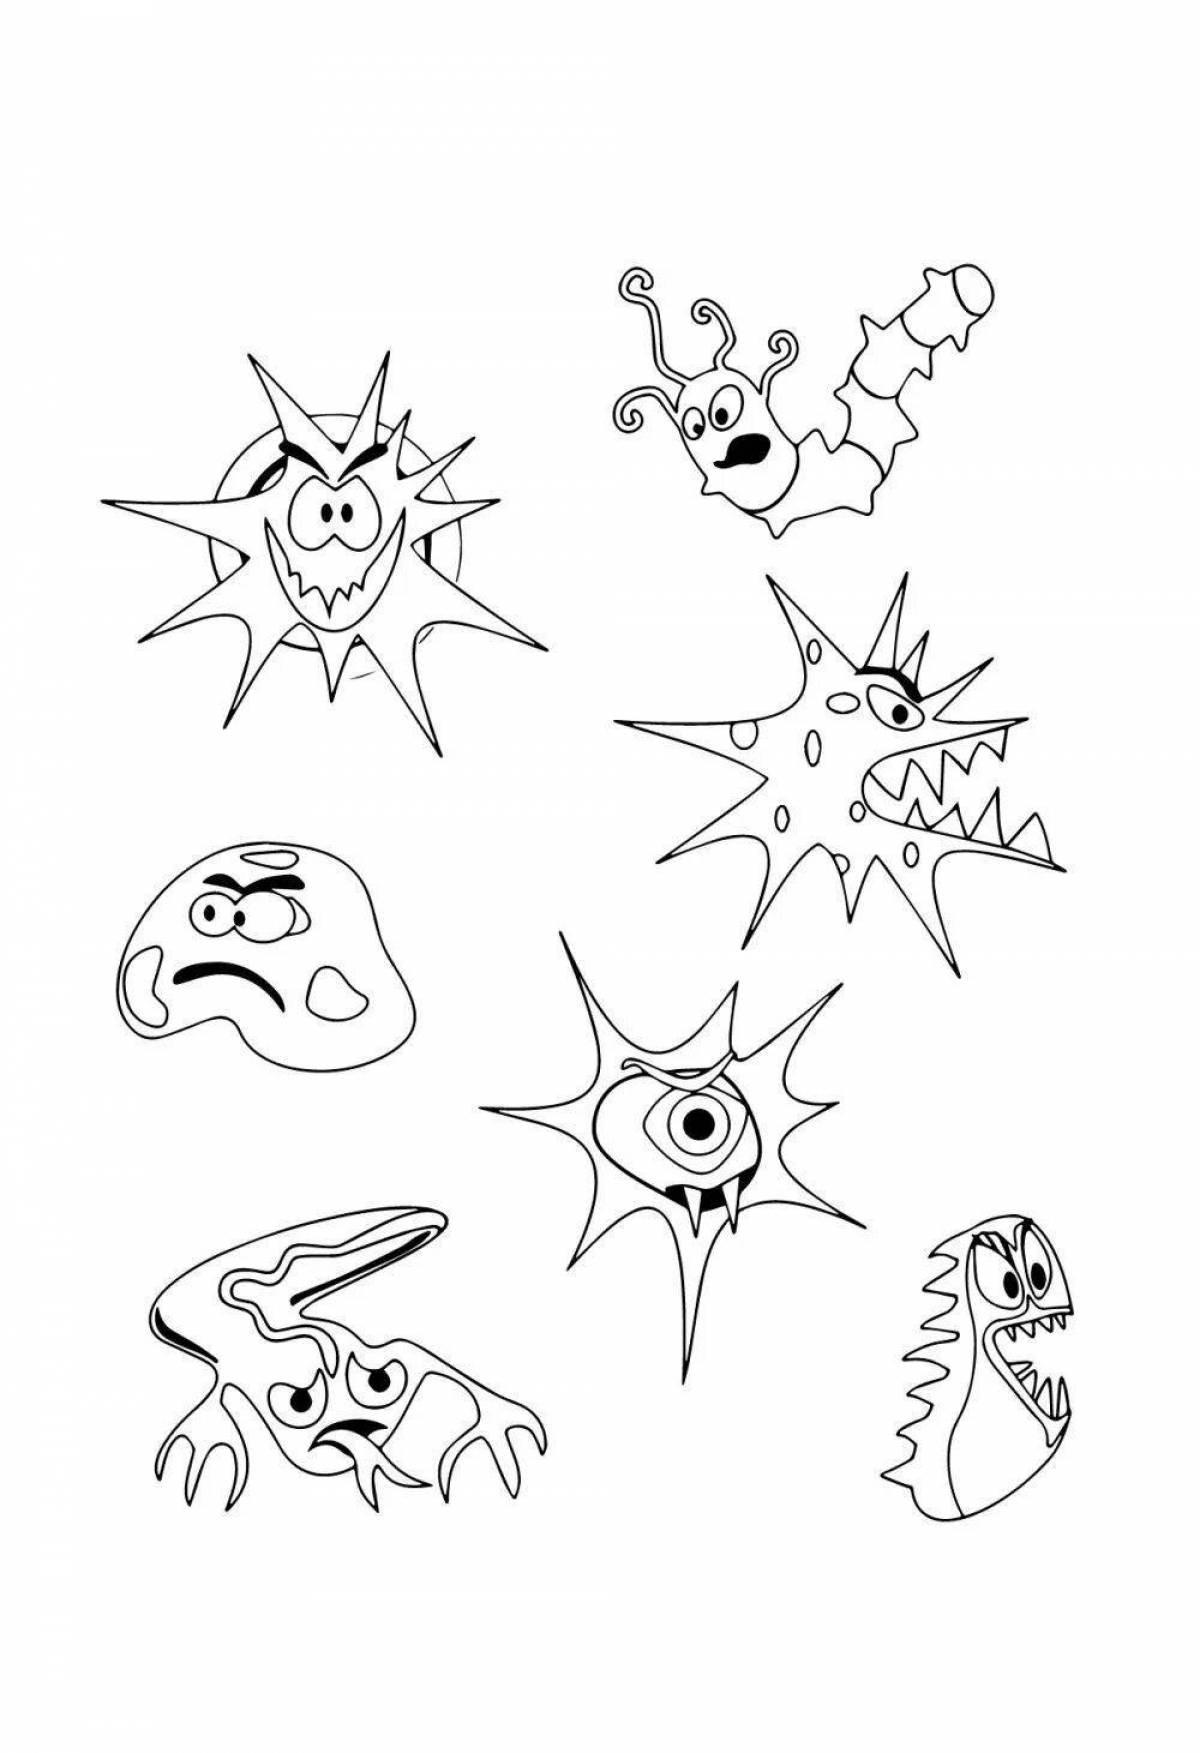 Imaginative germs and bacteria coloring page